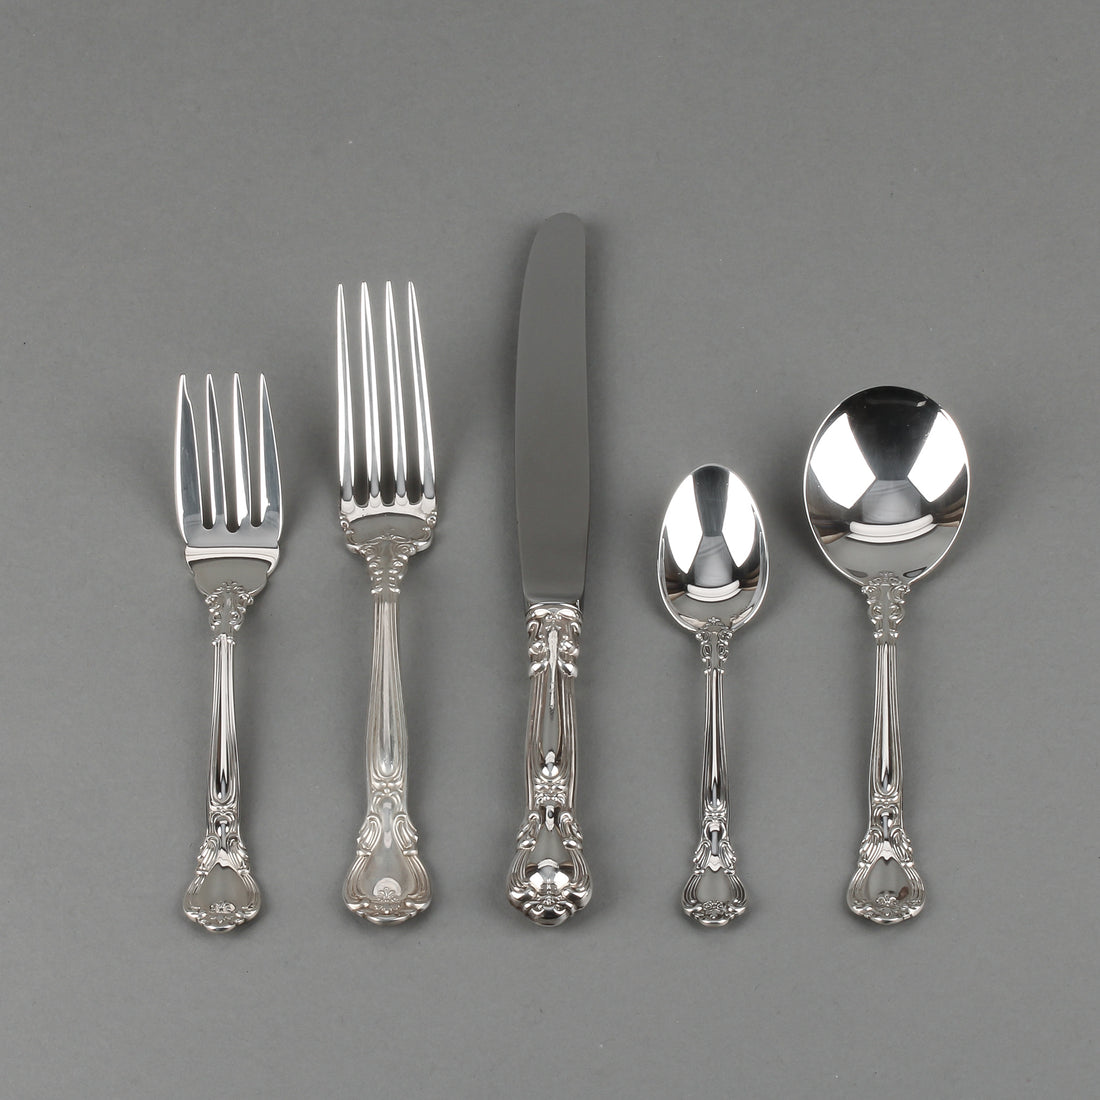 BIRKS Chantilly Sterling Silver Luncheon Flatware - 12 Place Settings